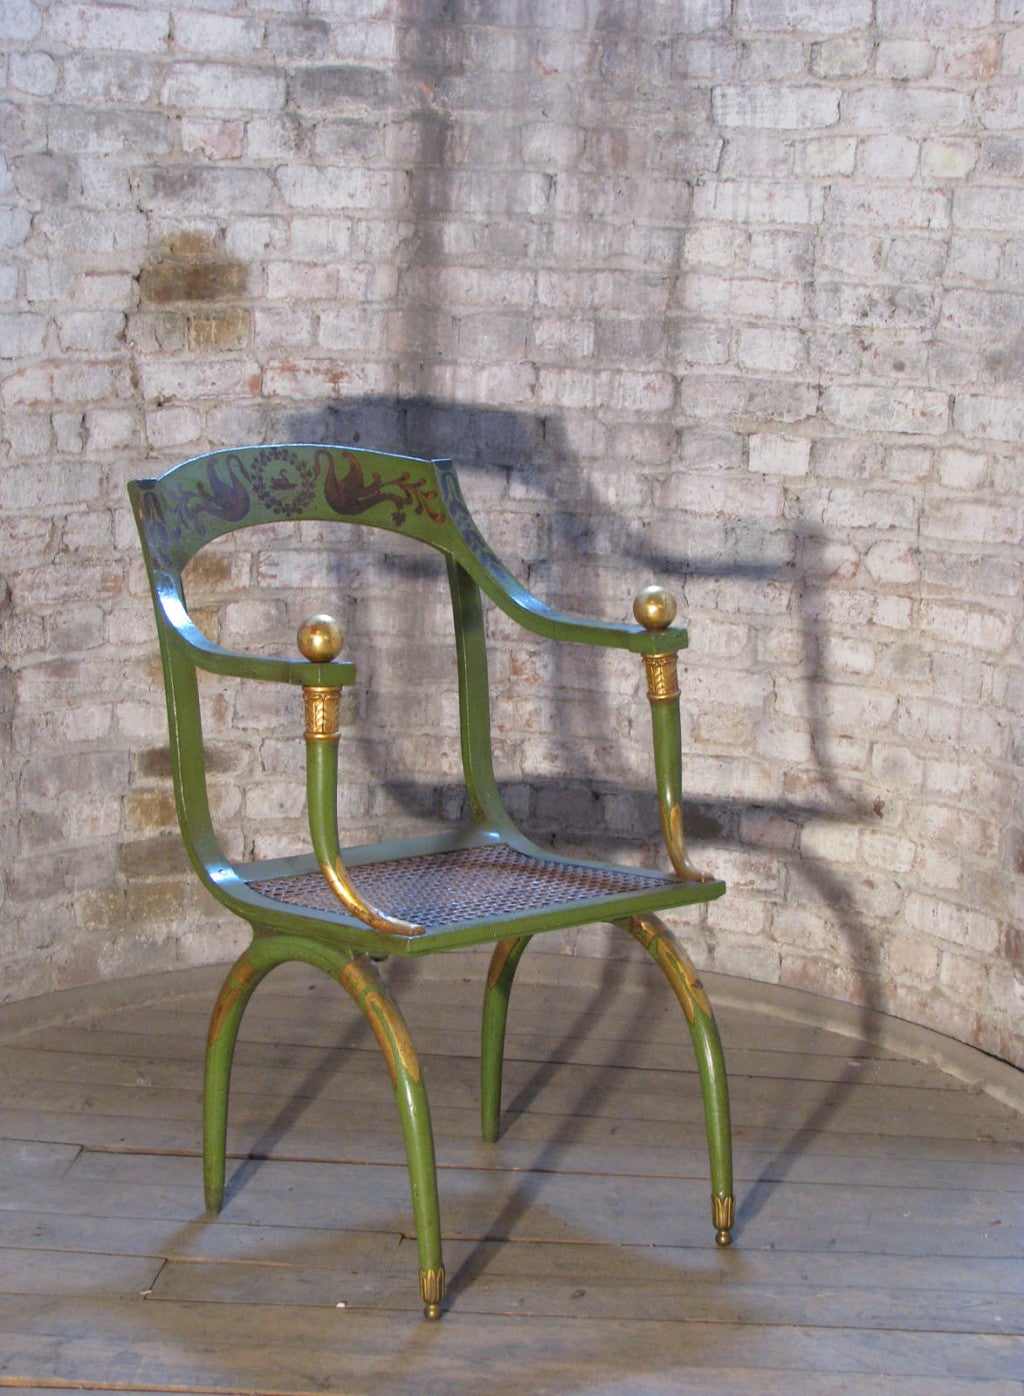 Neoclassical green painted and gilt armchair with caned seat.
After a model by Jean-Joseph Chapuis.
The front legs retain their brass casters, the rear legs are missing the casters.
